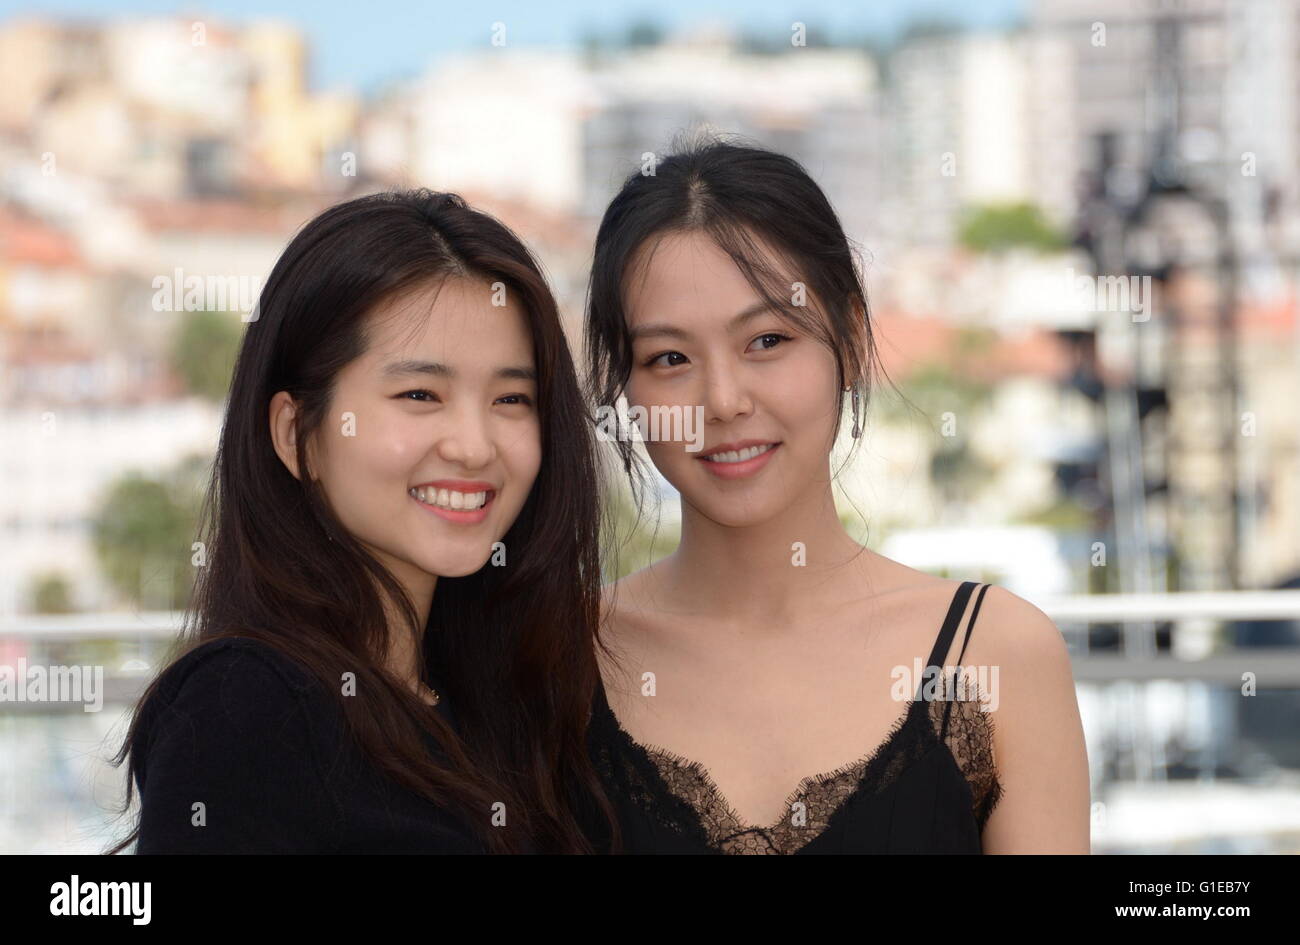 Cannes, France. 11th May, 2016. CANNES, FRANCE - MAY 14: Kim Tae-Ri, Kim Min-Hee attend the 'Mademoiselle (Agassi, The Handmaiden)' - Photocall at the annual 69th Cannes Film Festival at Palais des Festivals on May 14, 2016 in Cannes, France. © Frederick Injimbert/ZUMA Wire/Alamy Live News Stock Photo